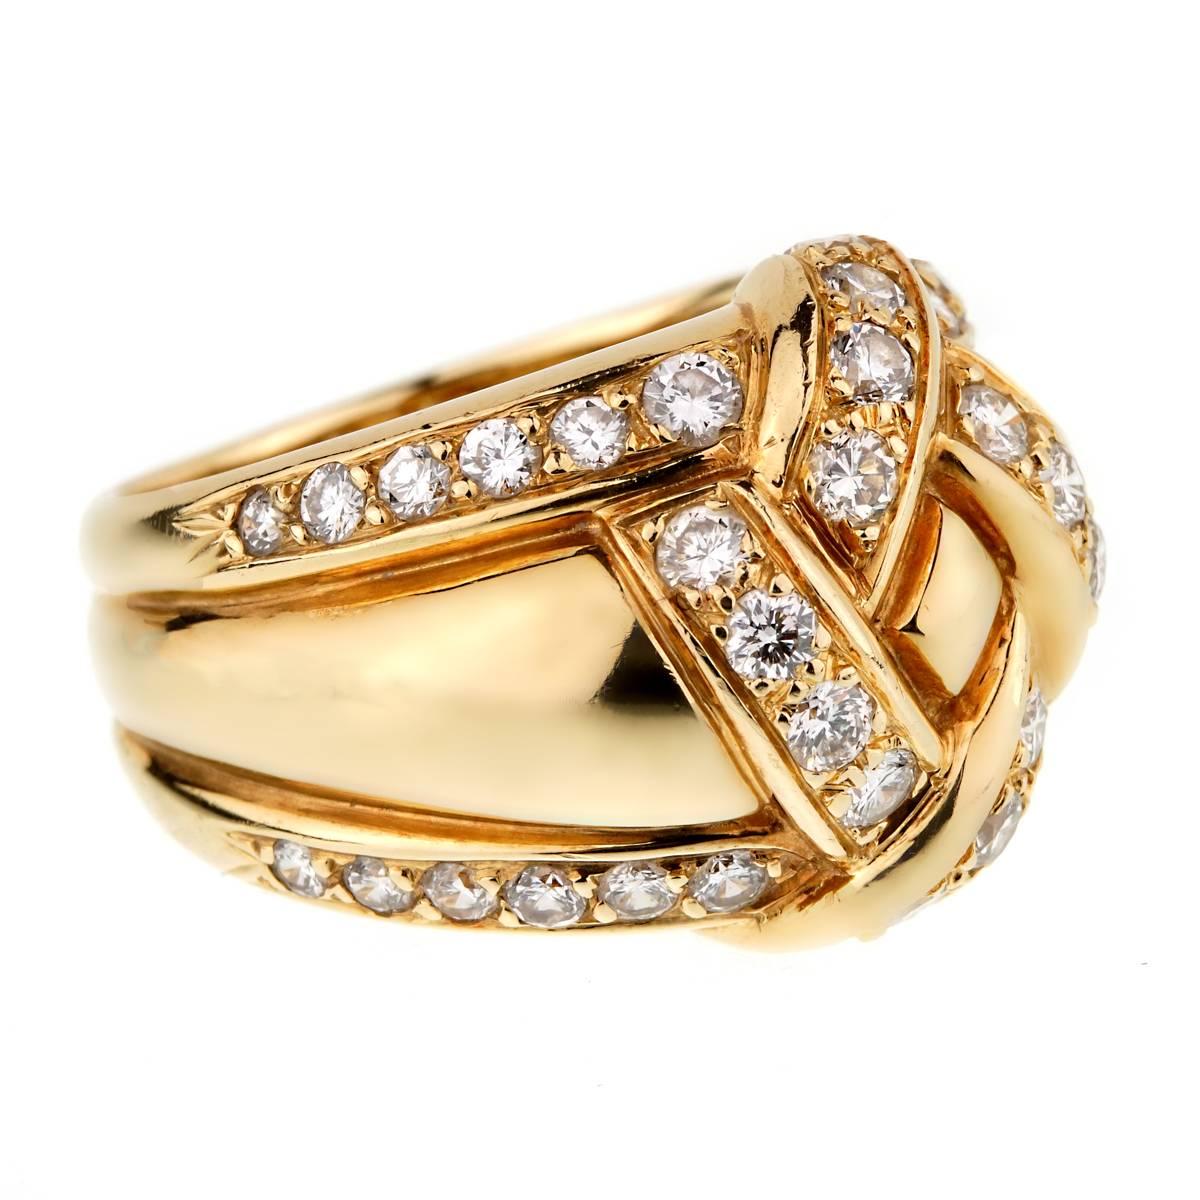 A stunning Dior ring circa 90's showcasing a bombe style design set with round brilliant cut white diamonds in 18k yellow gold. 

Size 6 1/2 Resizeable

Sku: 0000909